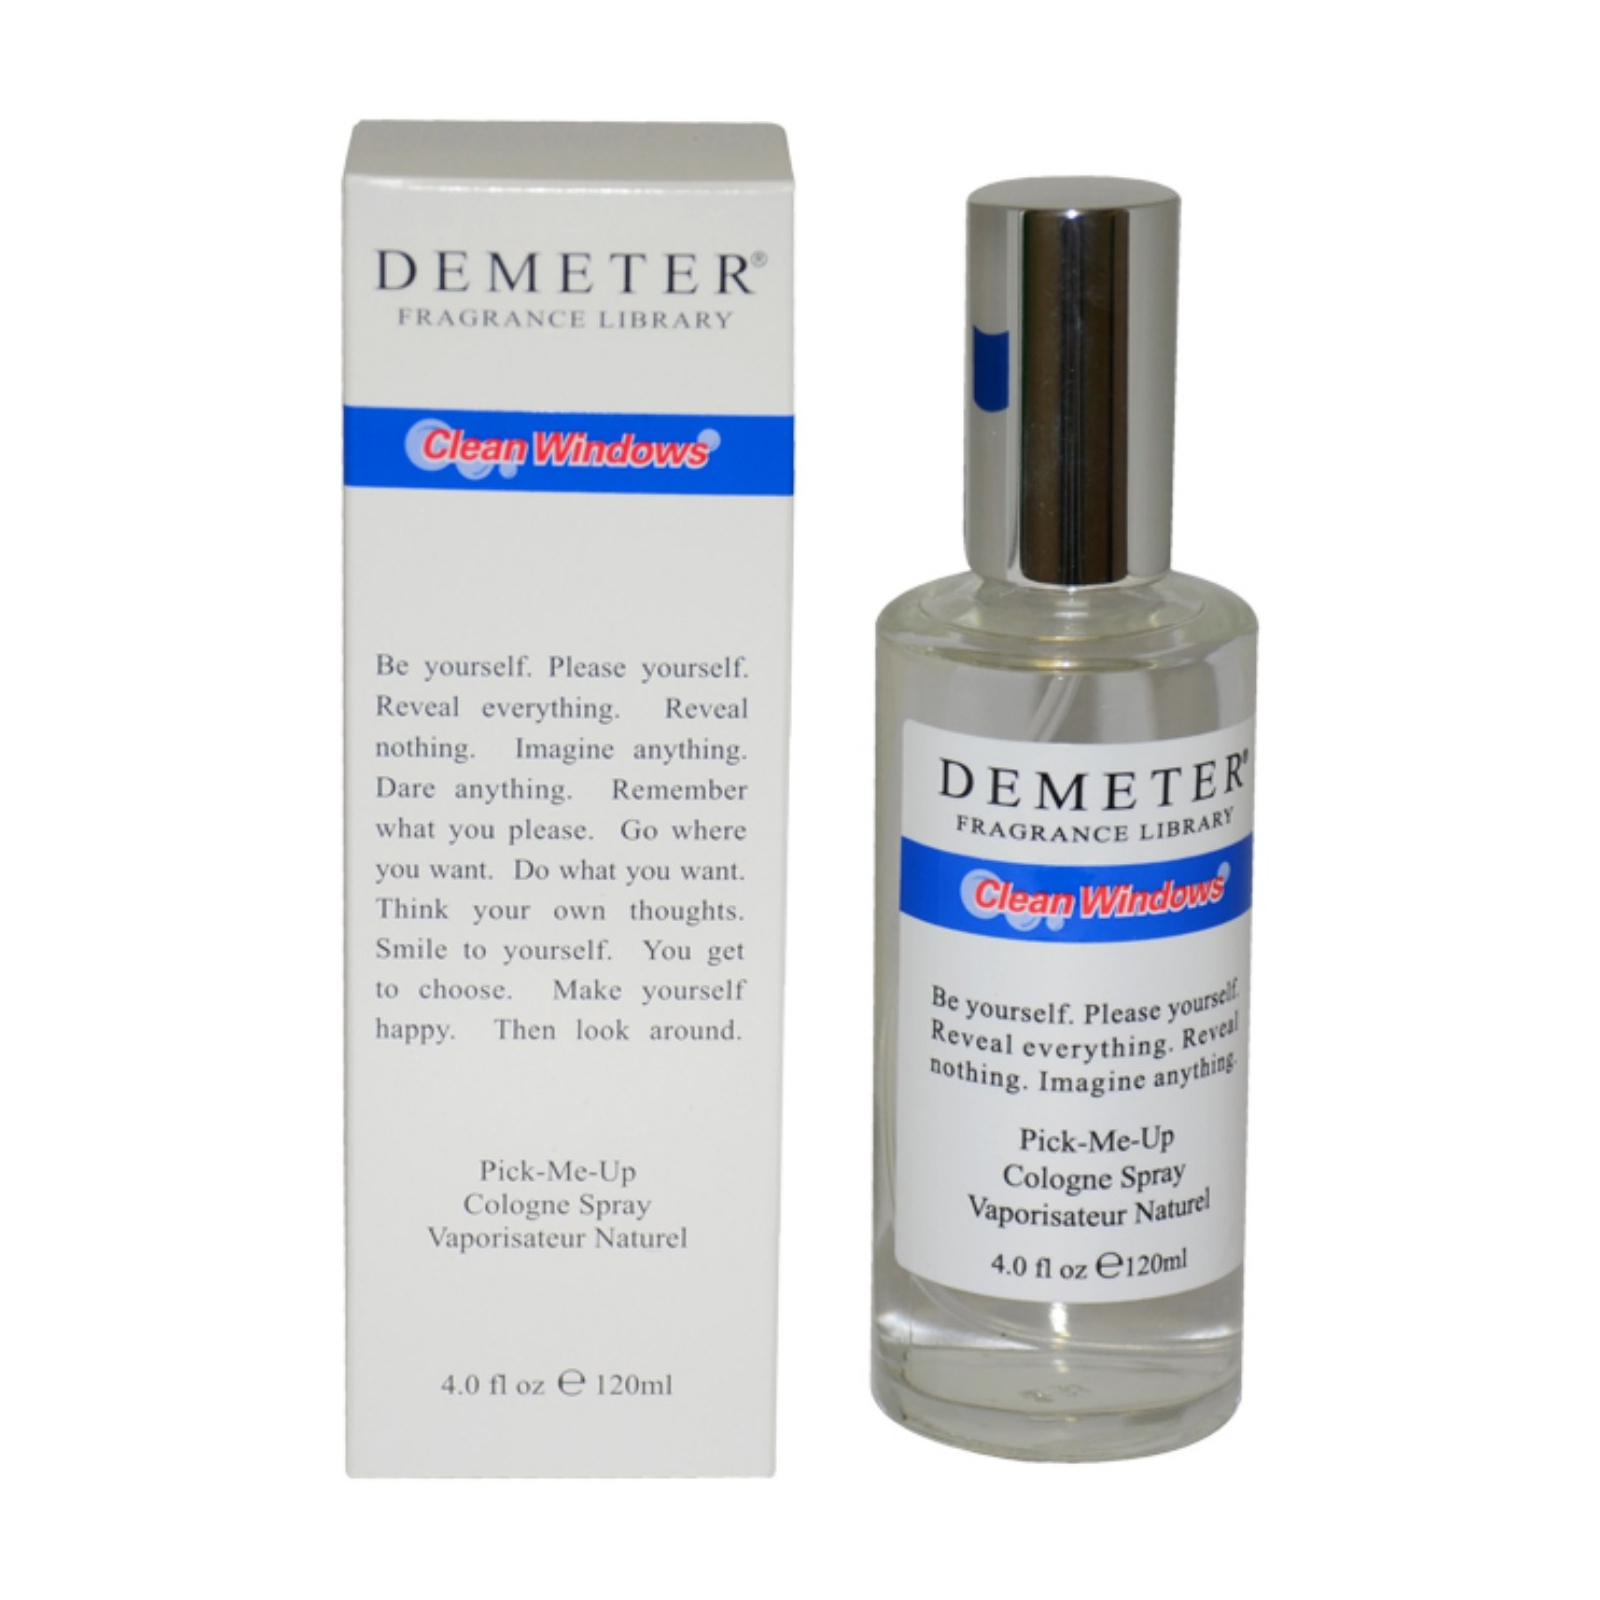 Demeter Clean Windows by  for Unisex - 4 oz Cologne Spray